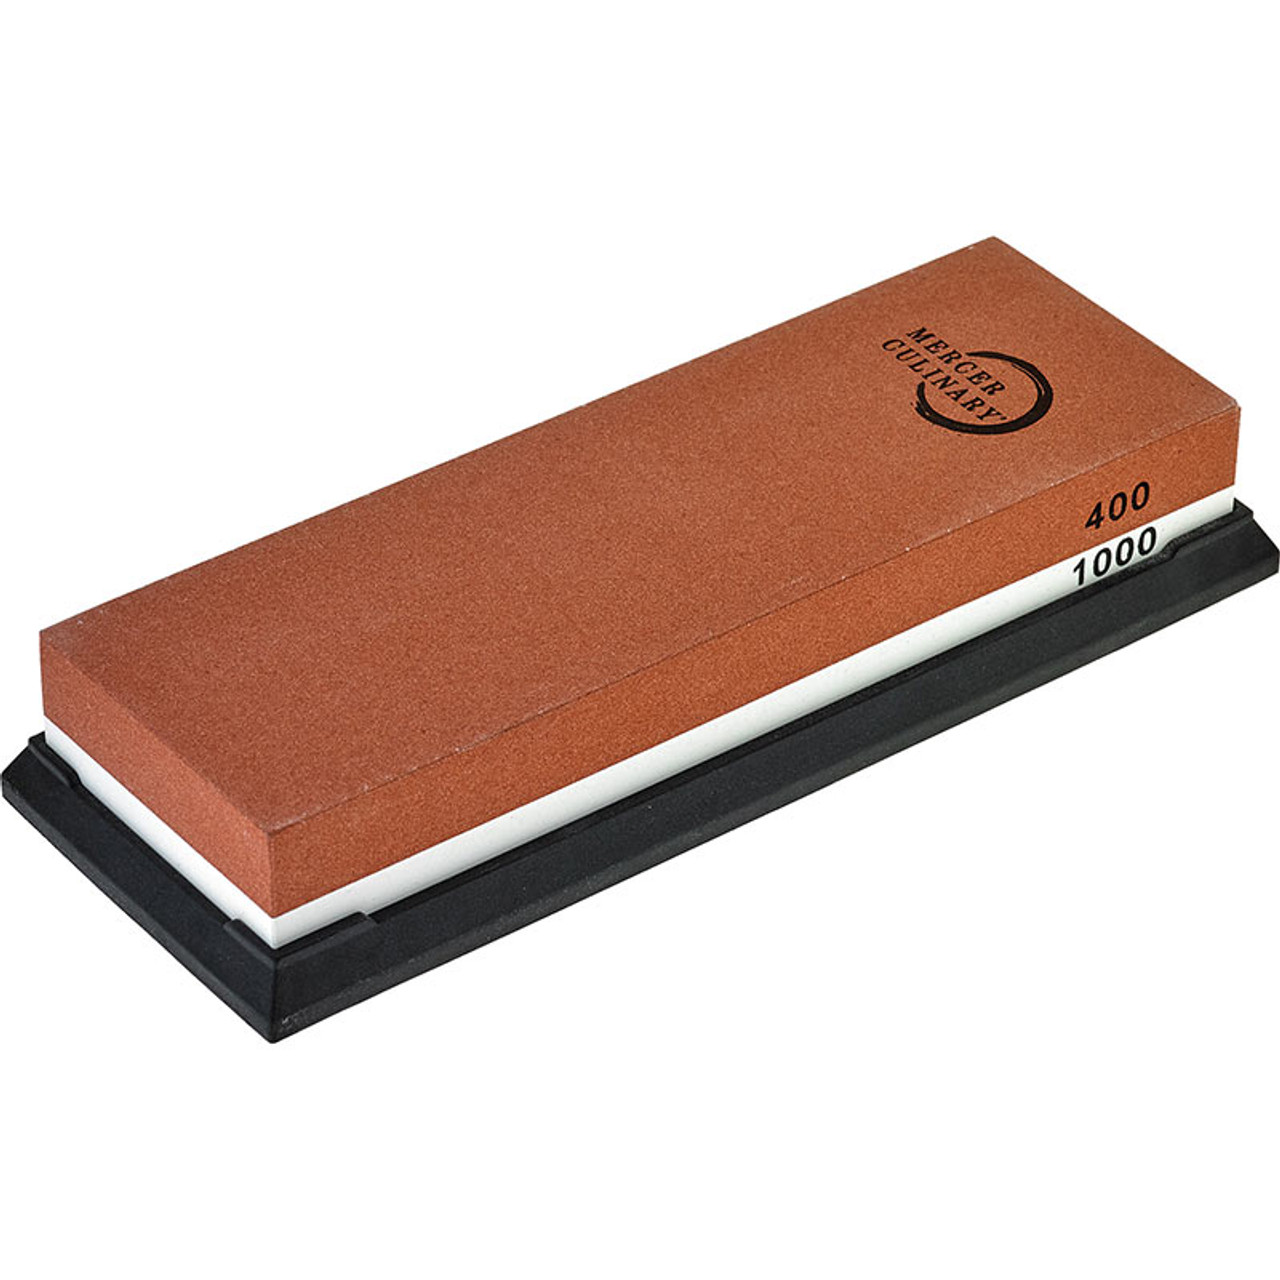 Mercer 400 and 1000 Combination Sharpening Stone with Silicone Base -  Fante's Kitchen Shop - Since 1906